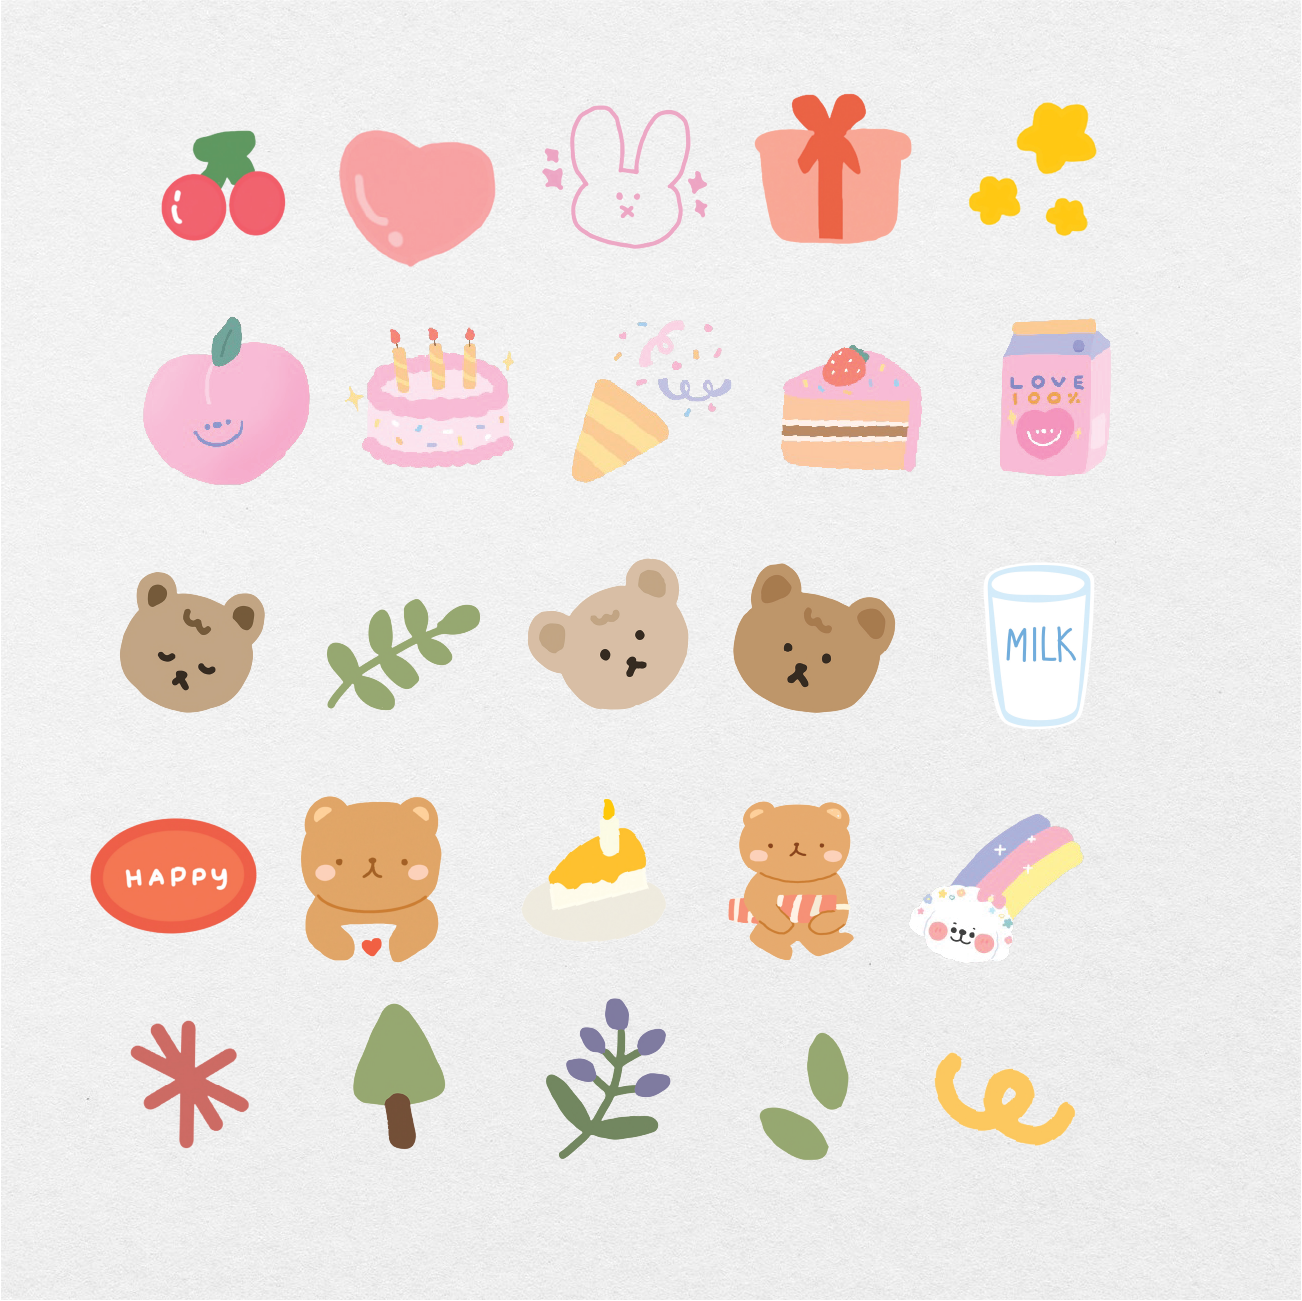 Printable Cute Bear Washi tape Printable Digital Washi Printable Stickers  Kawaii Stickers Journal Stickers Planner Stickers 